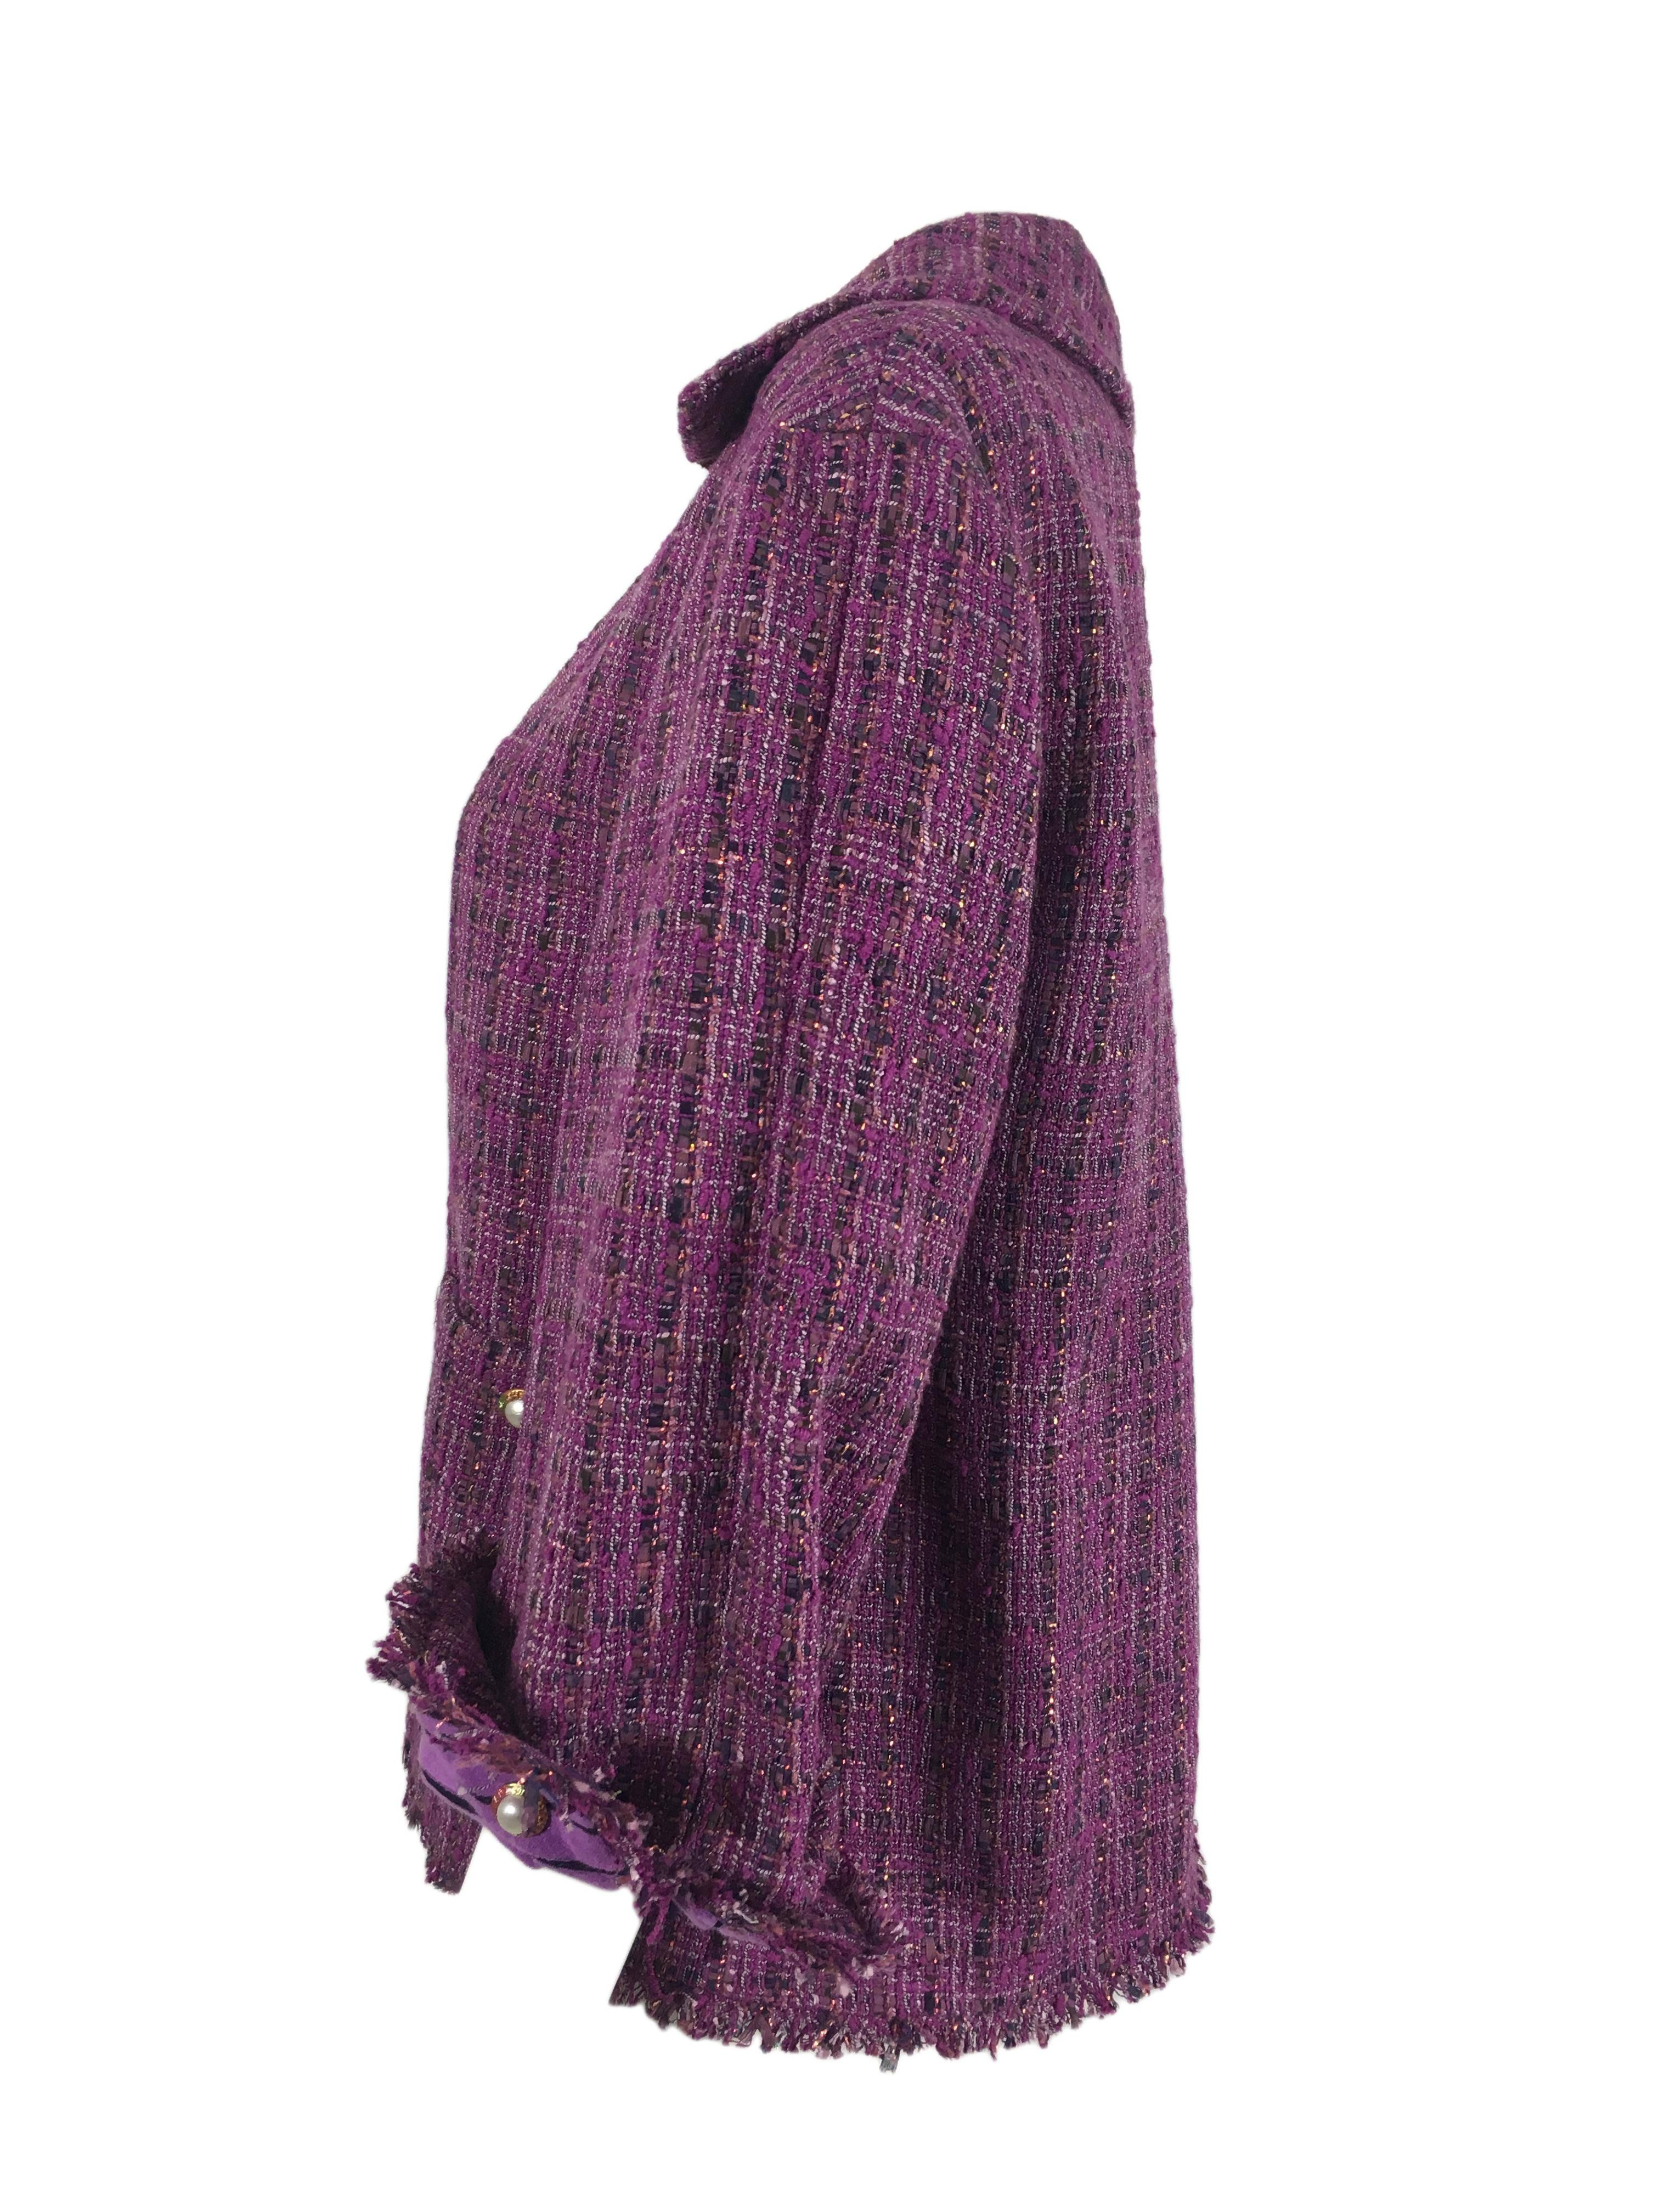 This tweed jacket features detachable zip front, two front pockets with fringed hem. Fringed rolled up cuffs with pearl buttons.  Fully lined in silk.